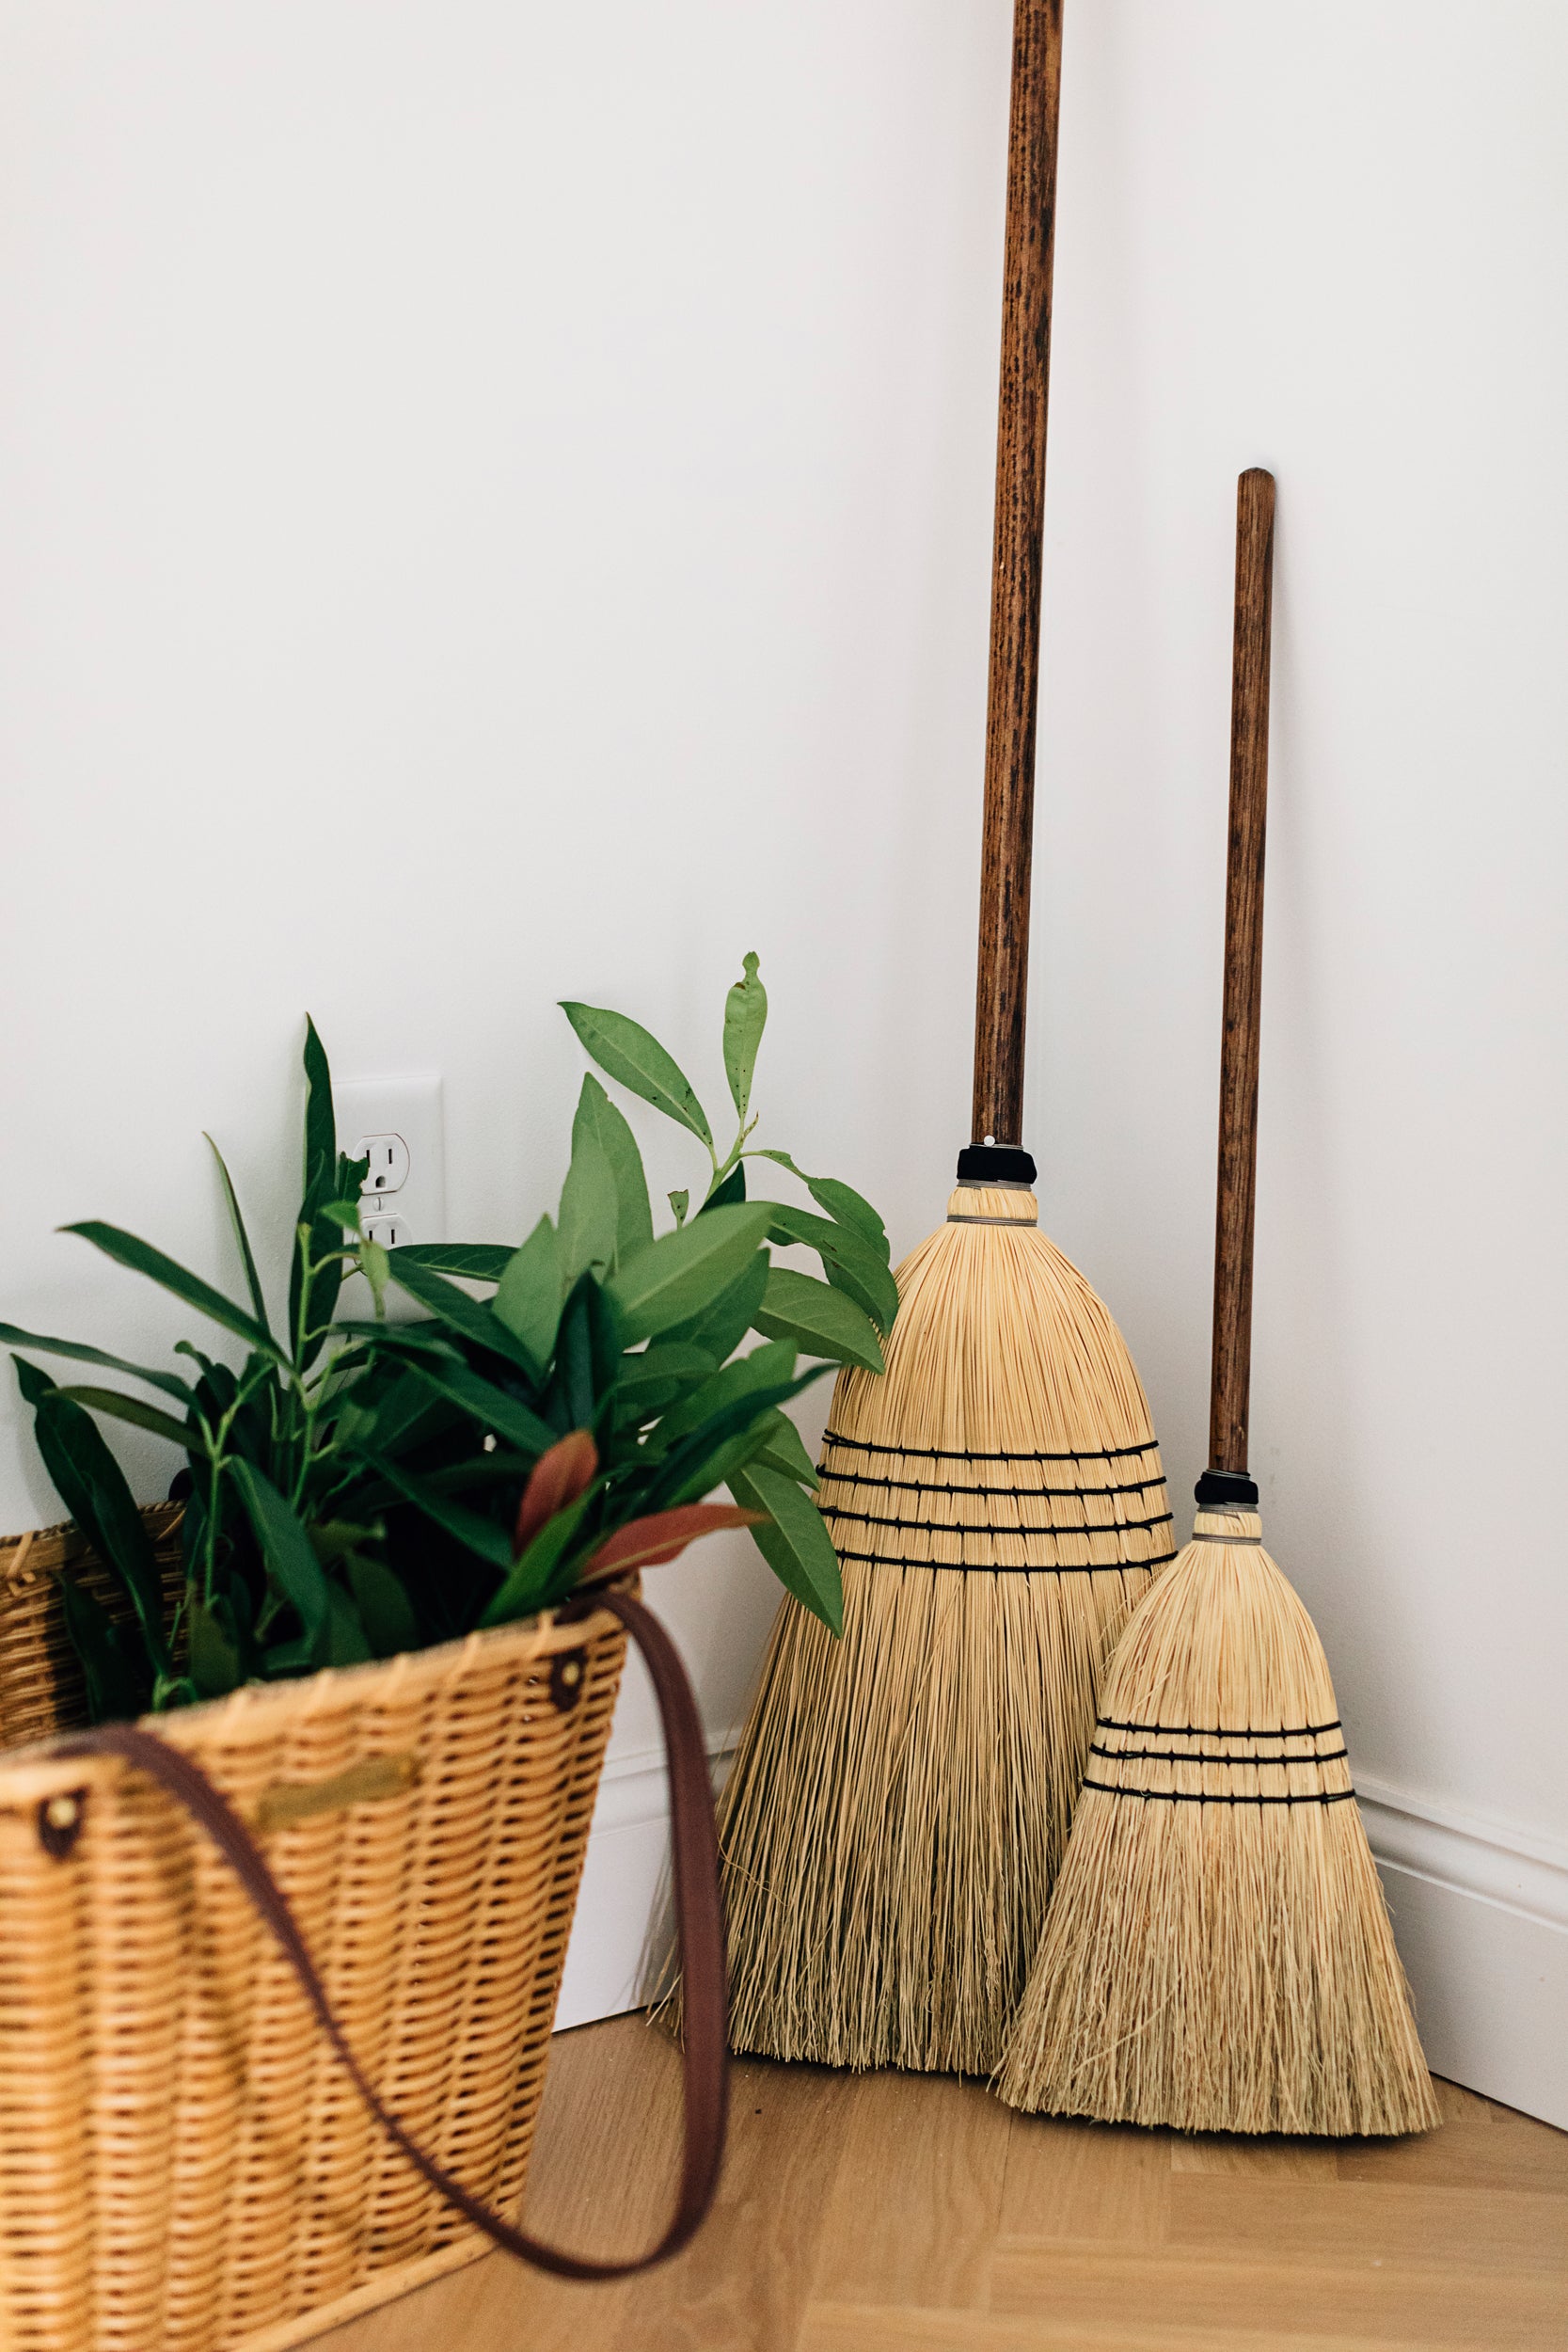 The Child's Broom Next to the Everyday Broom